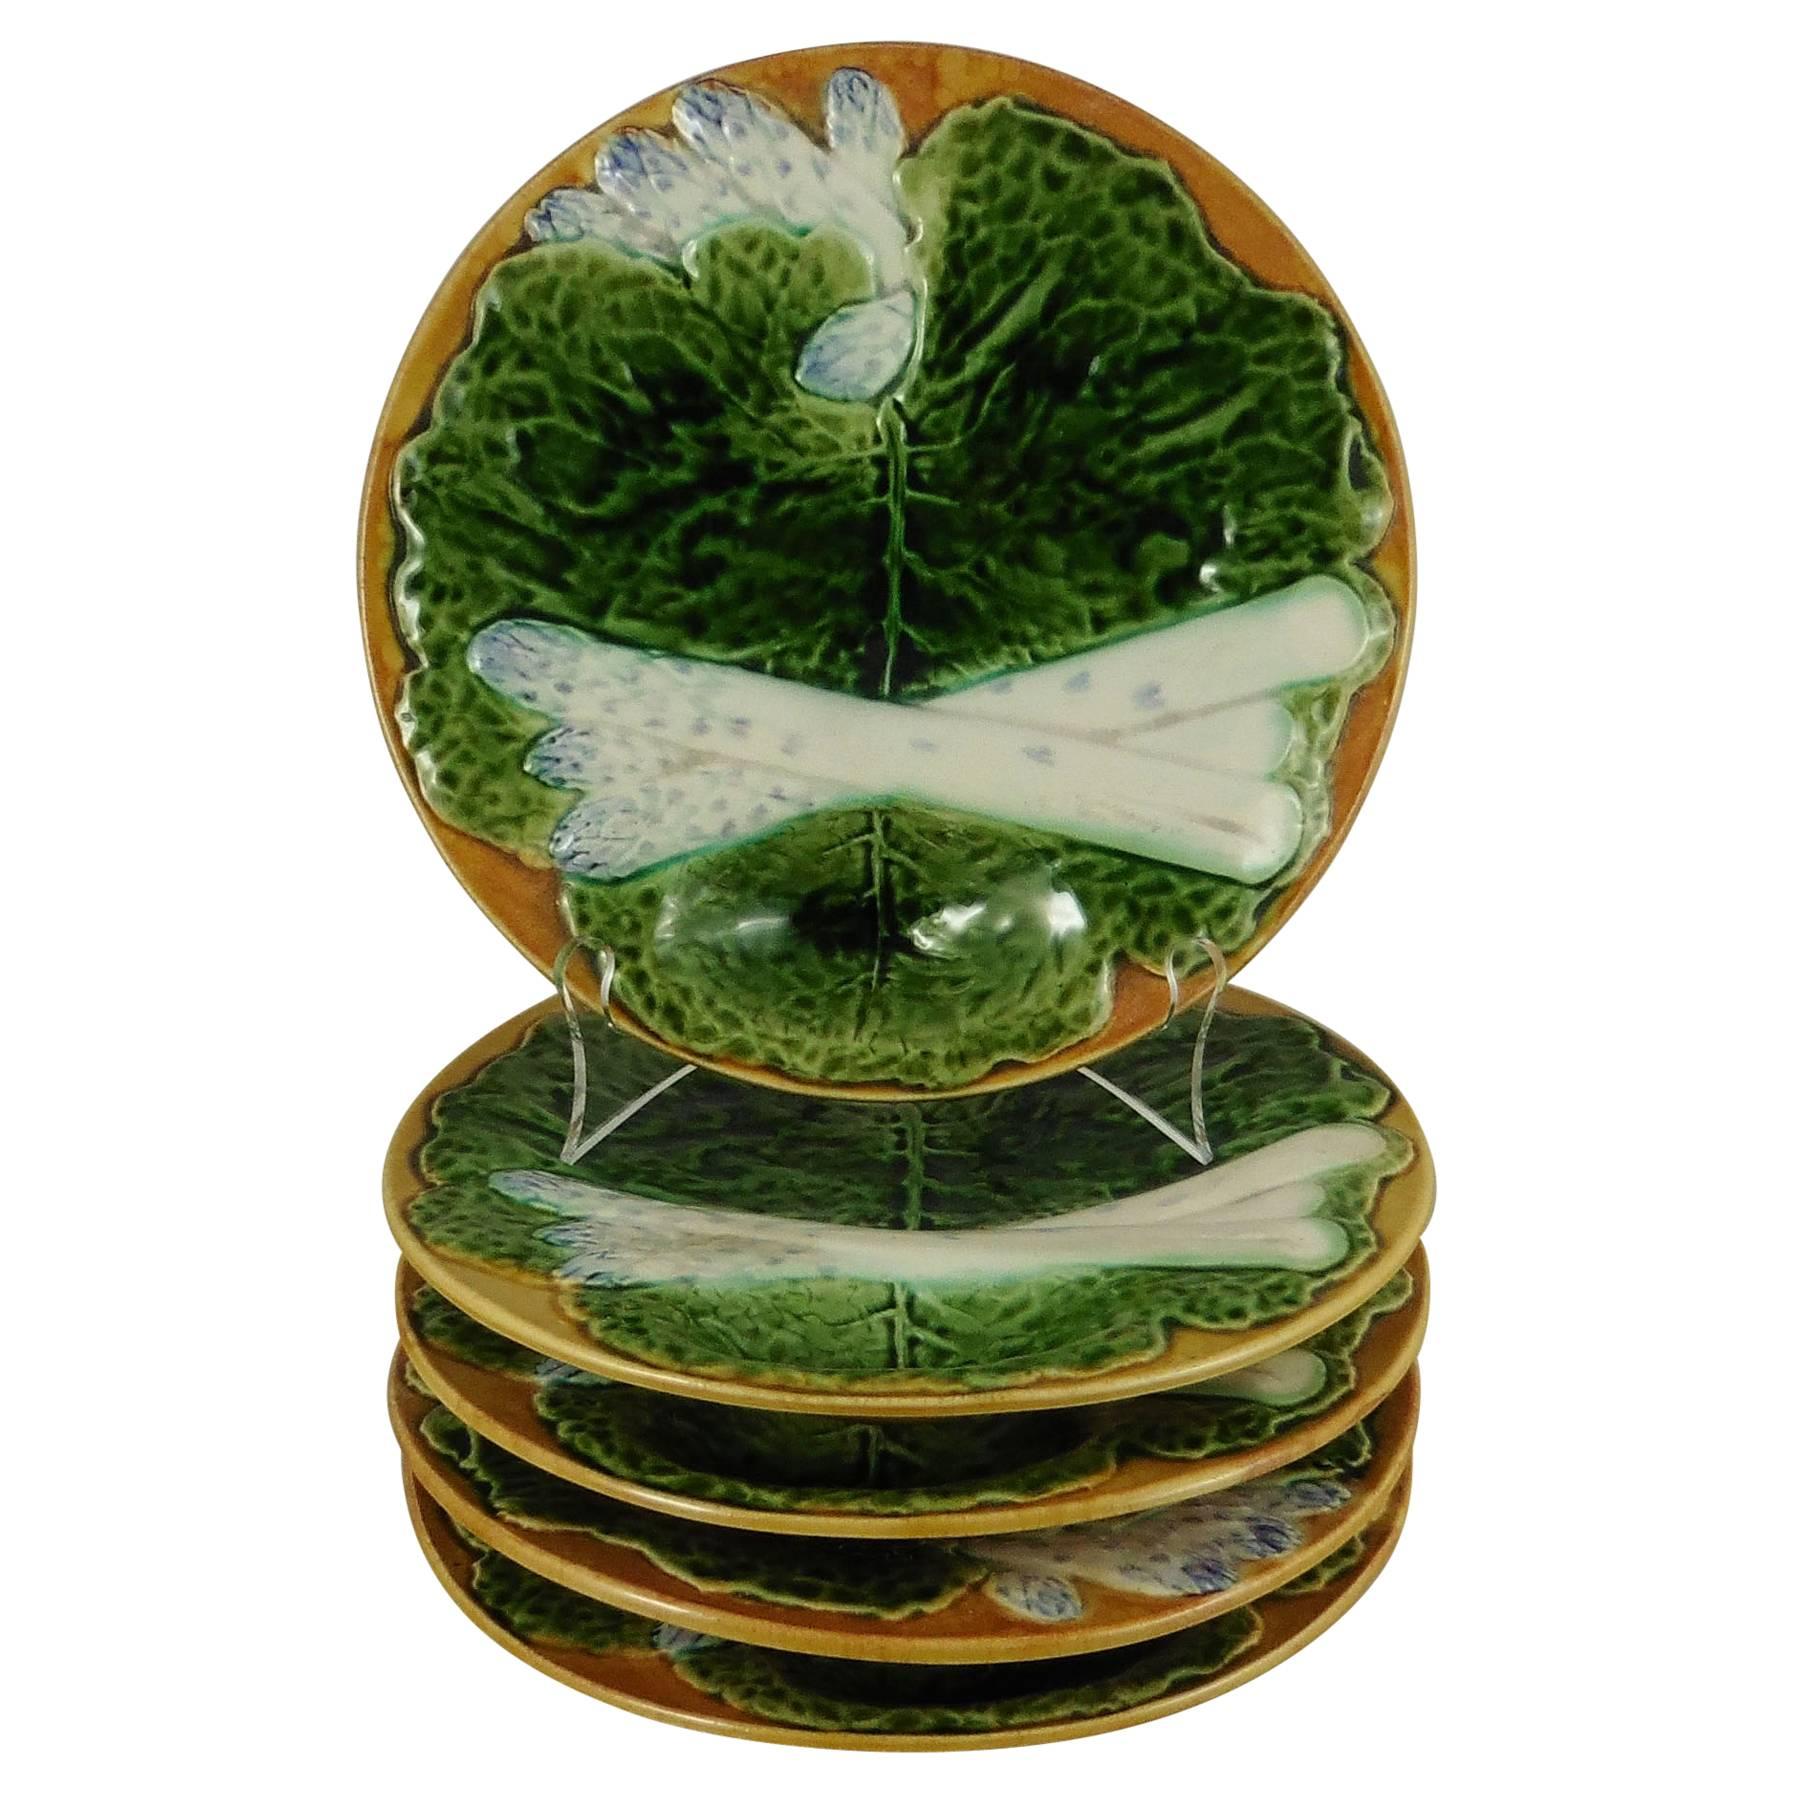 19th Century Majolica Asparagus Plate with Cabbage Leaves Creil & Montereau